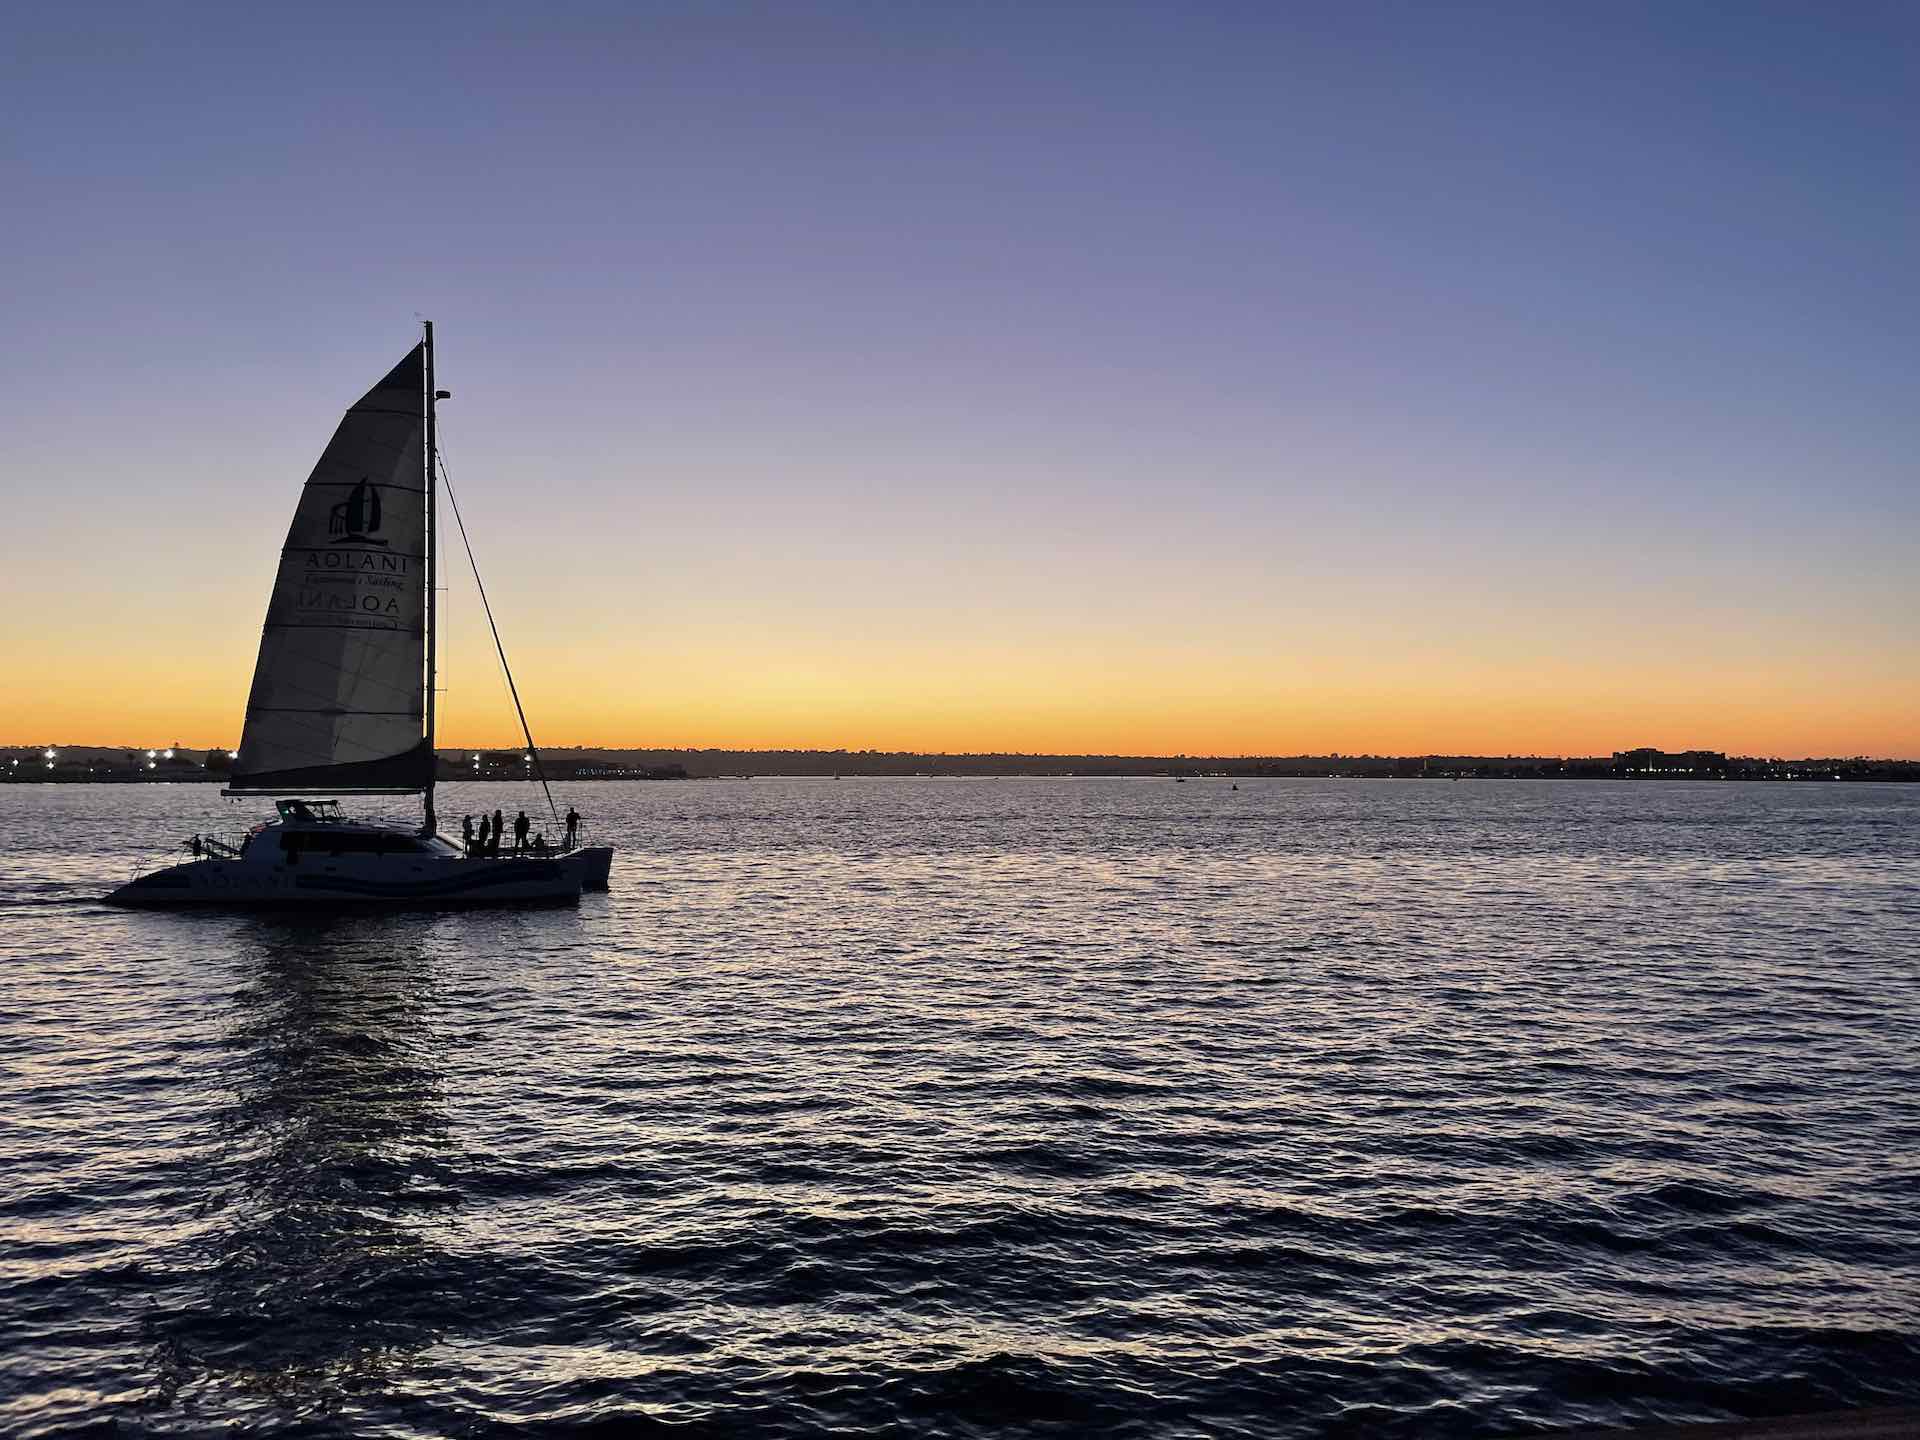 Sail boat in the San Diego bay